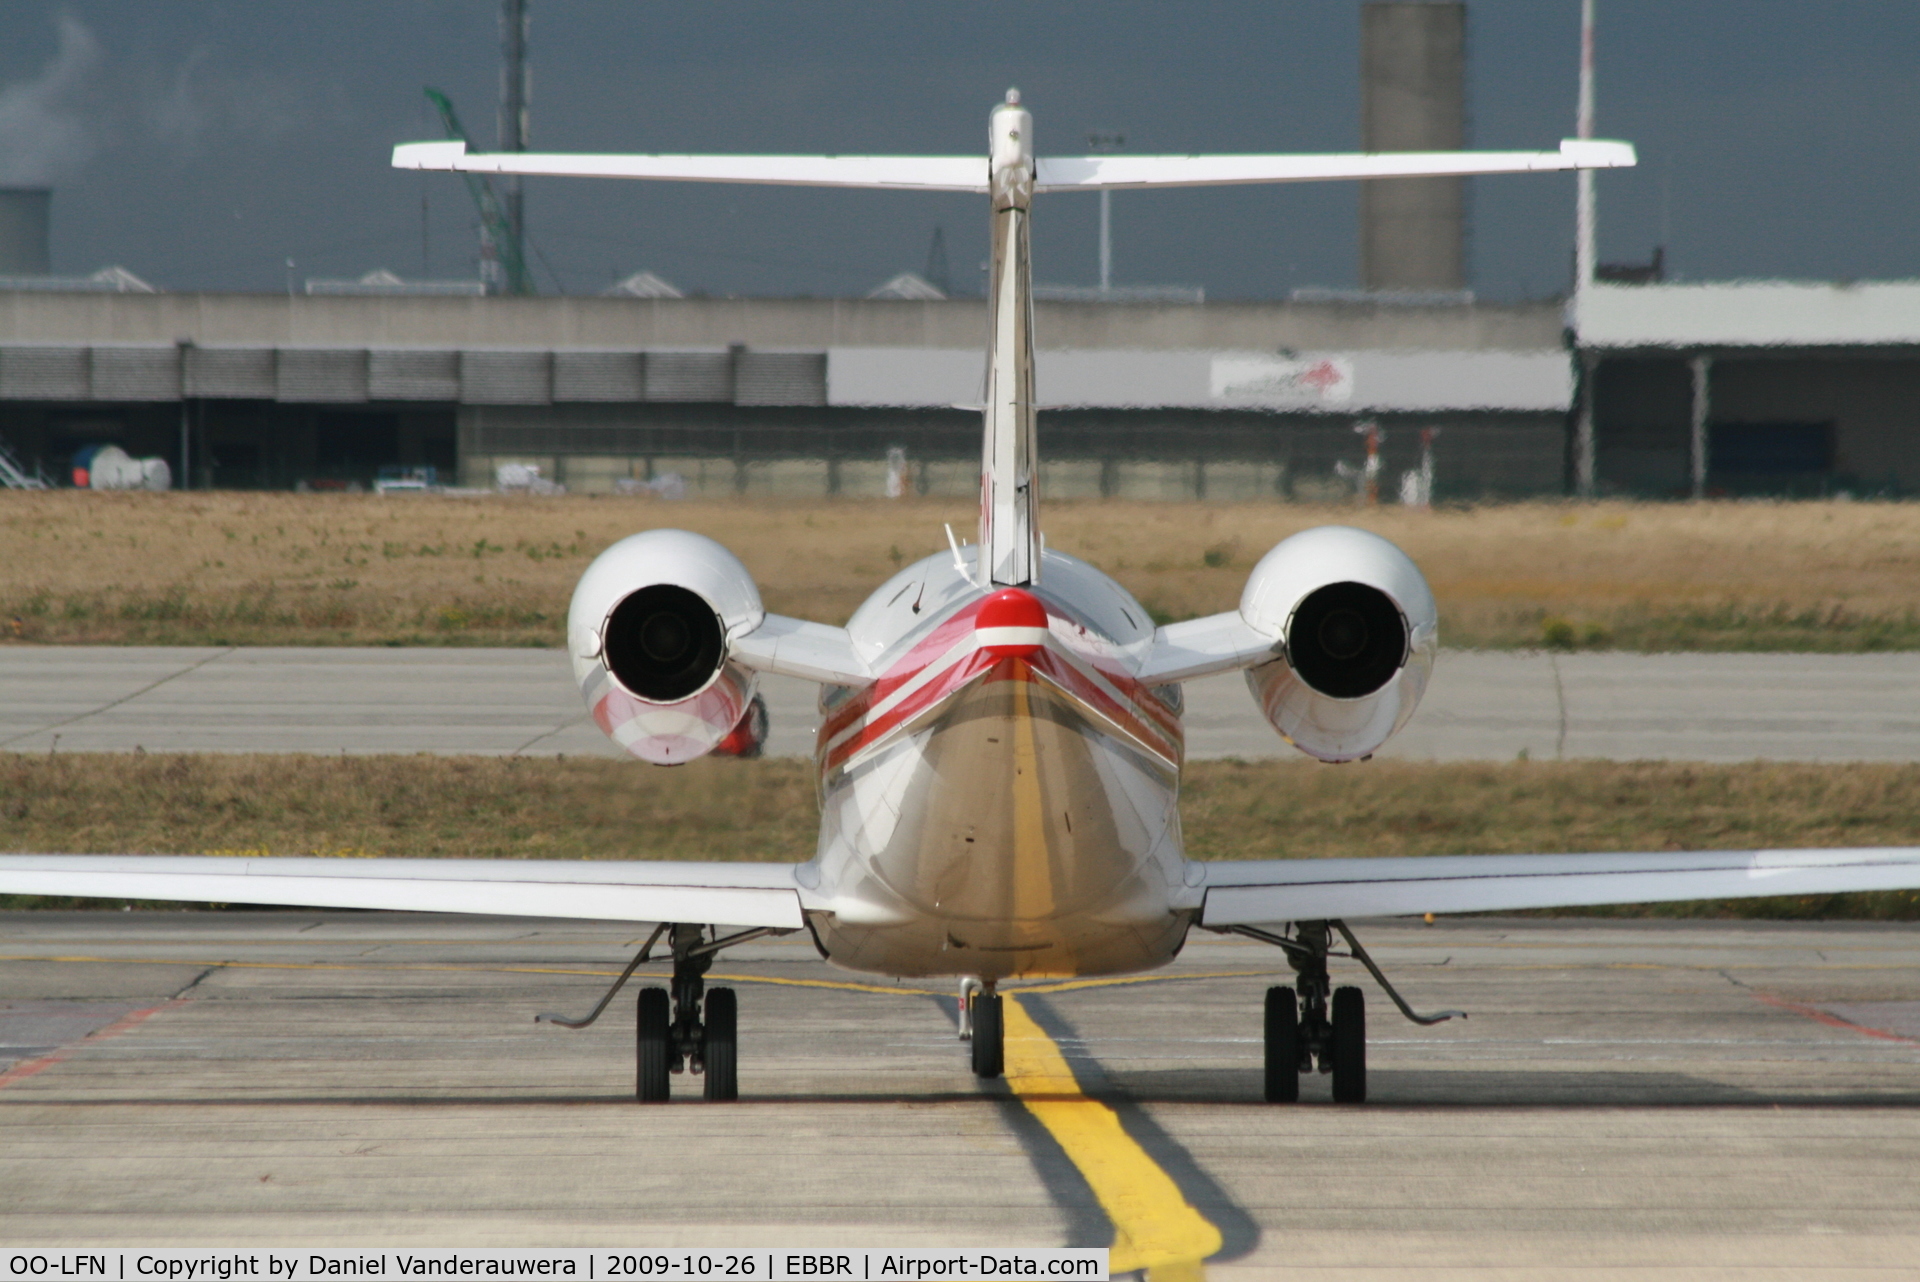 OO-LFN, Learjet 45 C/N 45-250, Taxiing to leave General Aviation apron